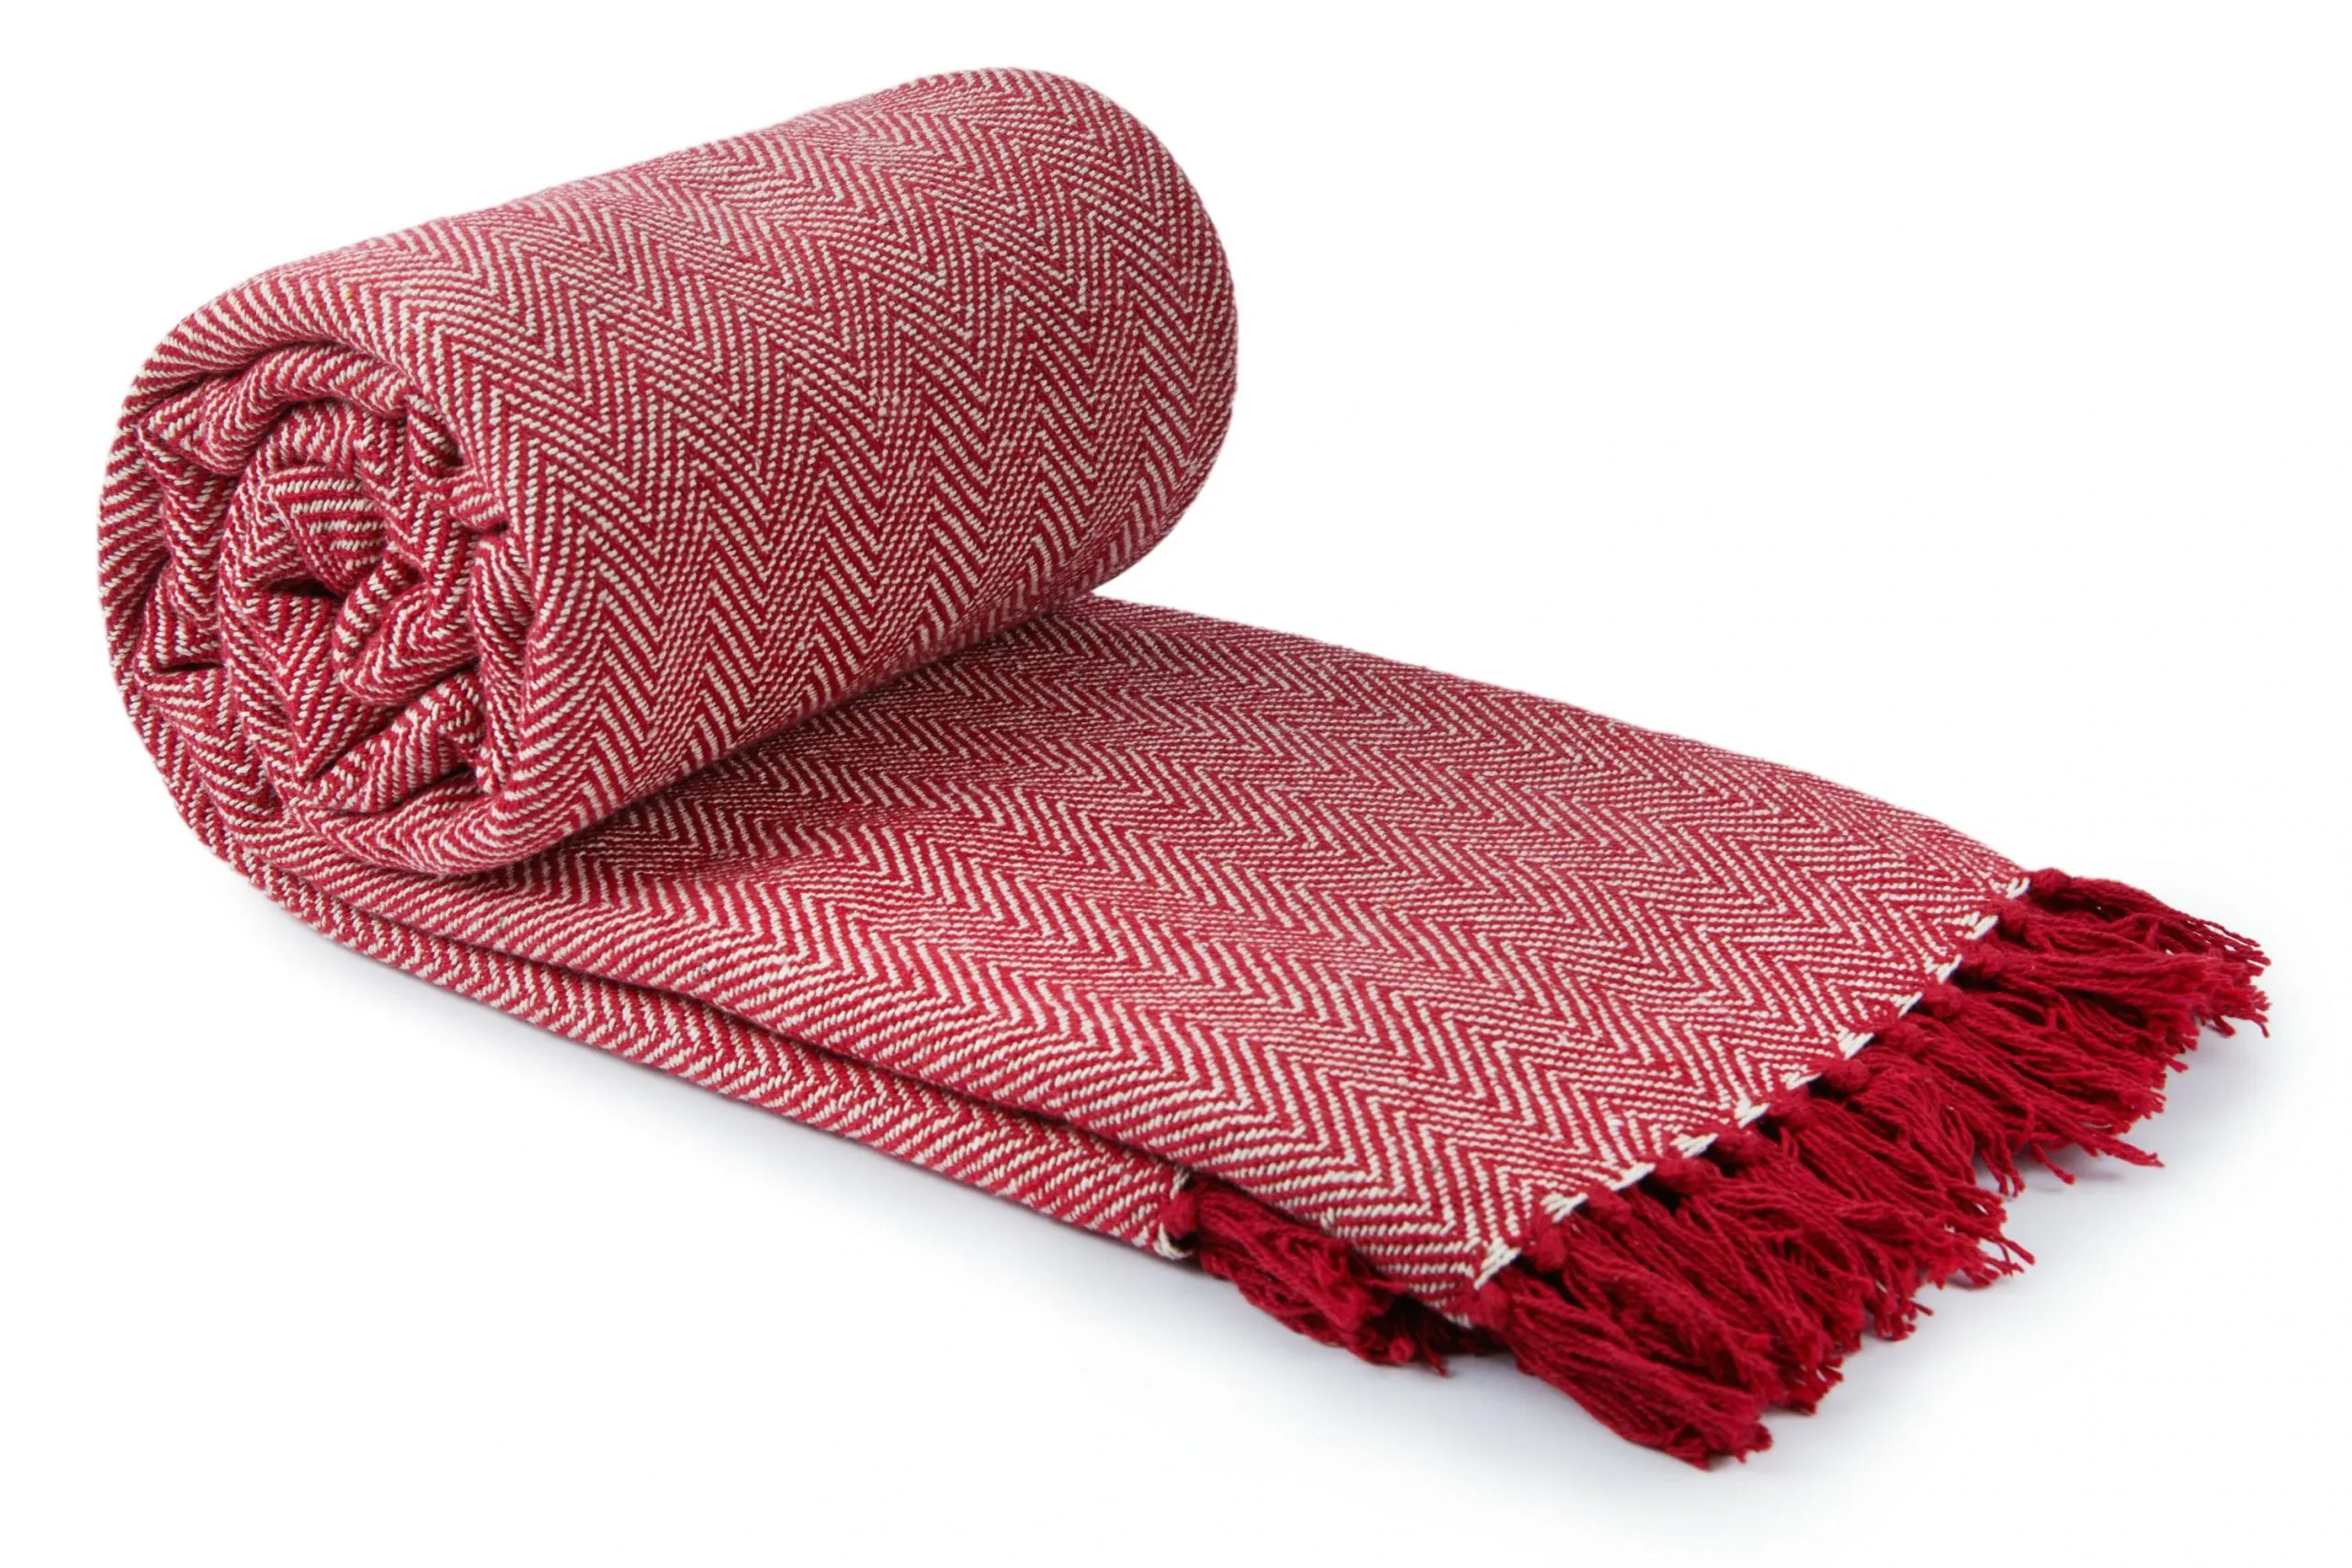 harringbone recycled red cotton blanket